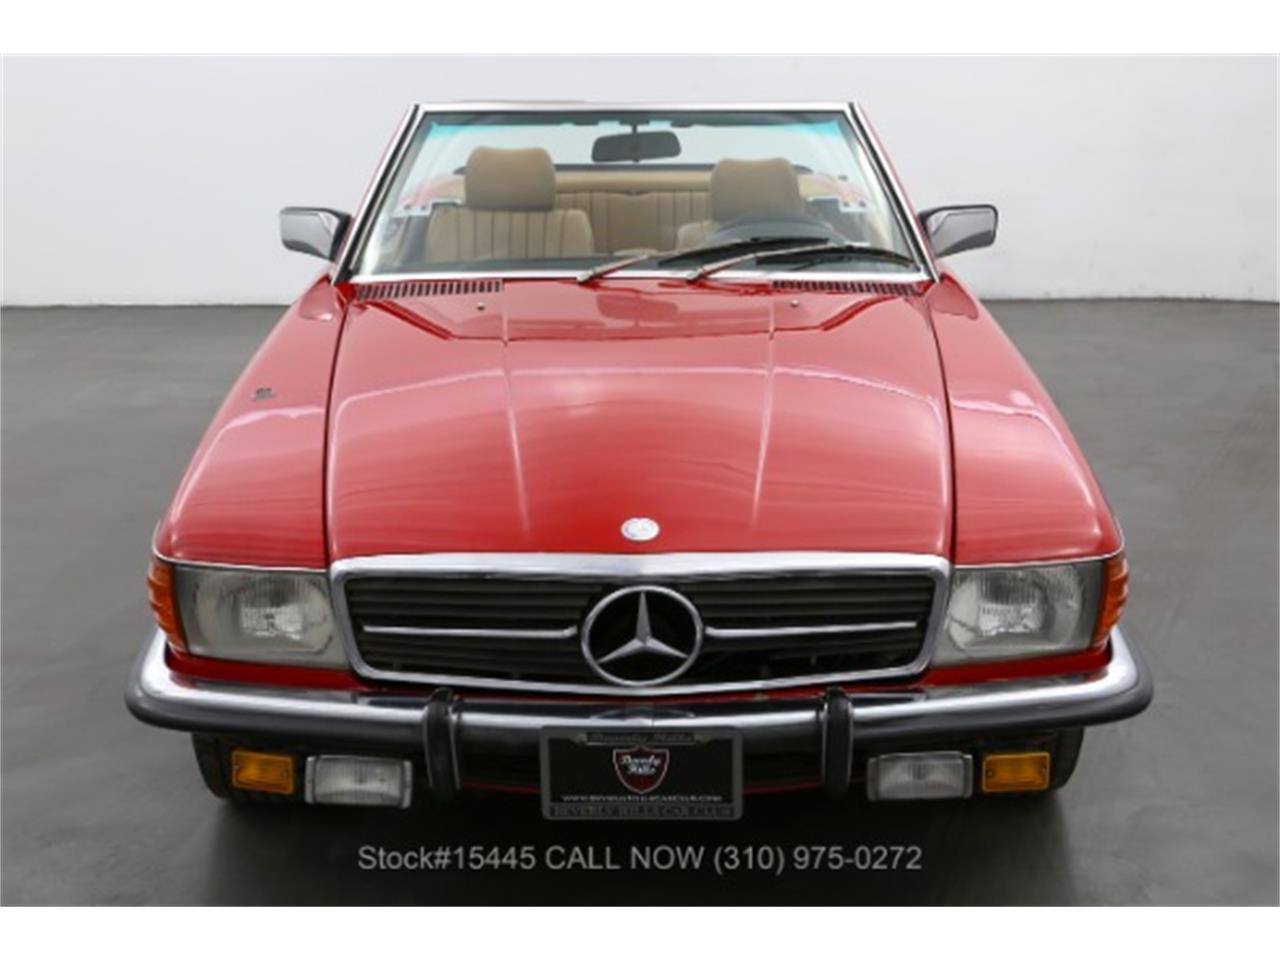 For Sale: 1983 Mercedes-Benz 500SL in Beverly Hills, California for sale in Beverly Hills, CA